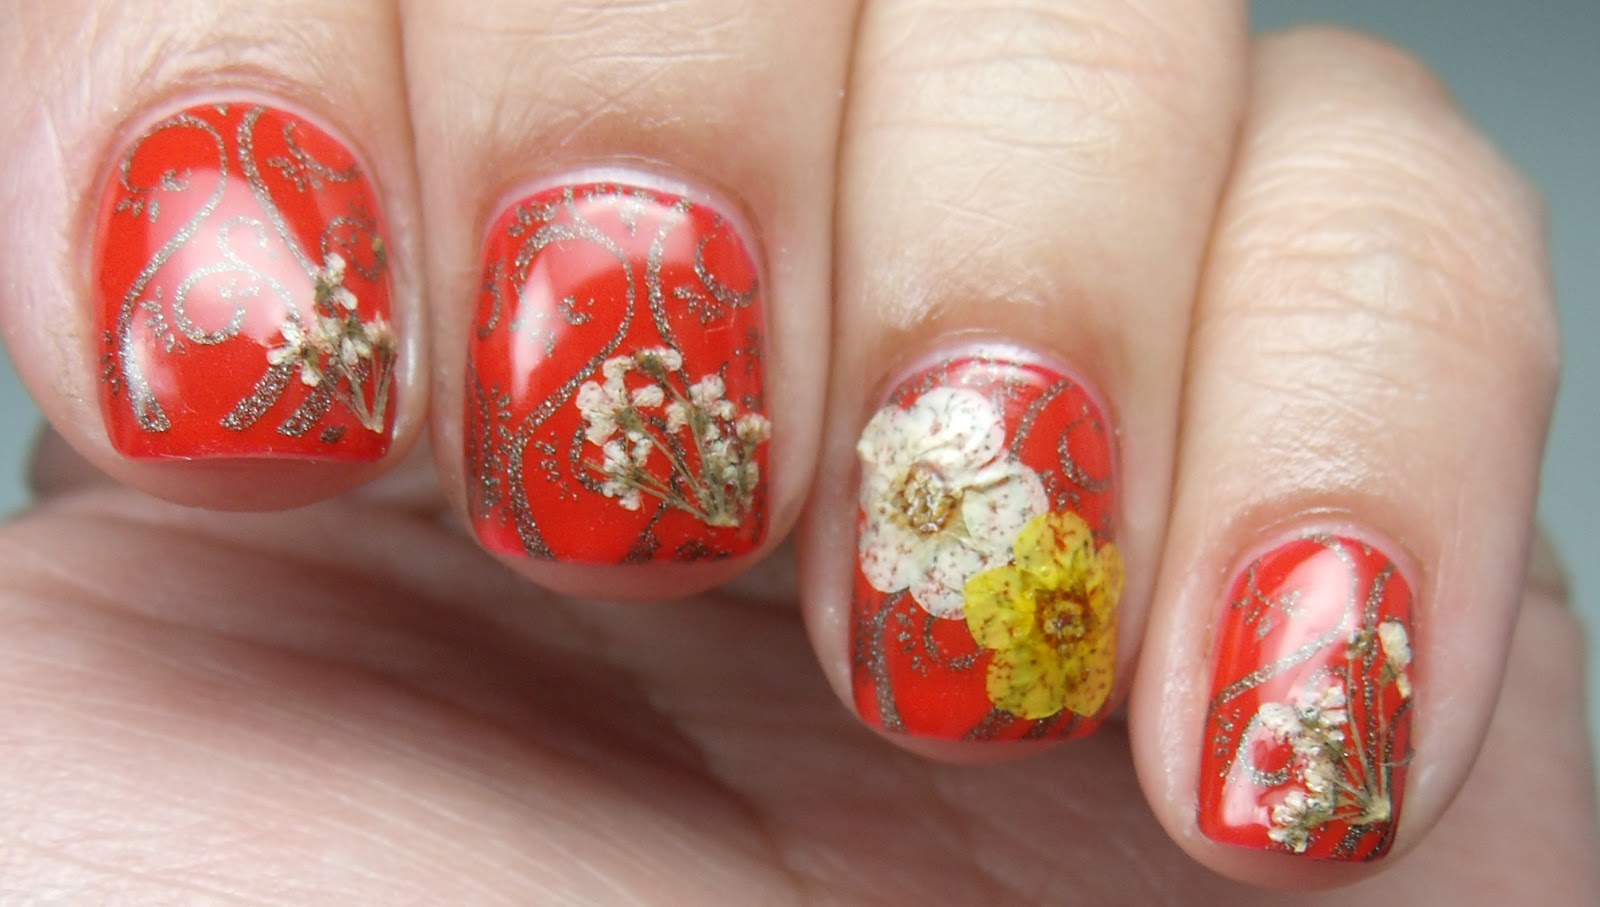 3. Festive Poinsettia Nail Art Design with Dried Flowers - wide 2